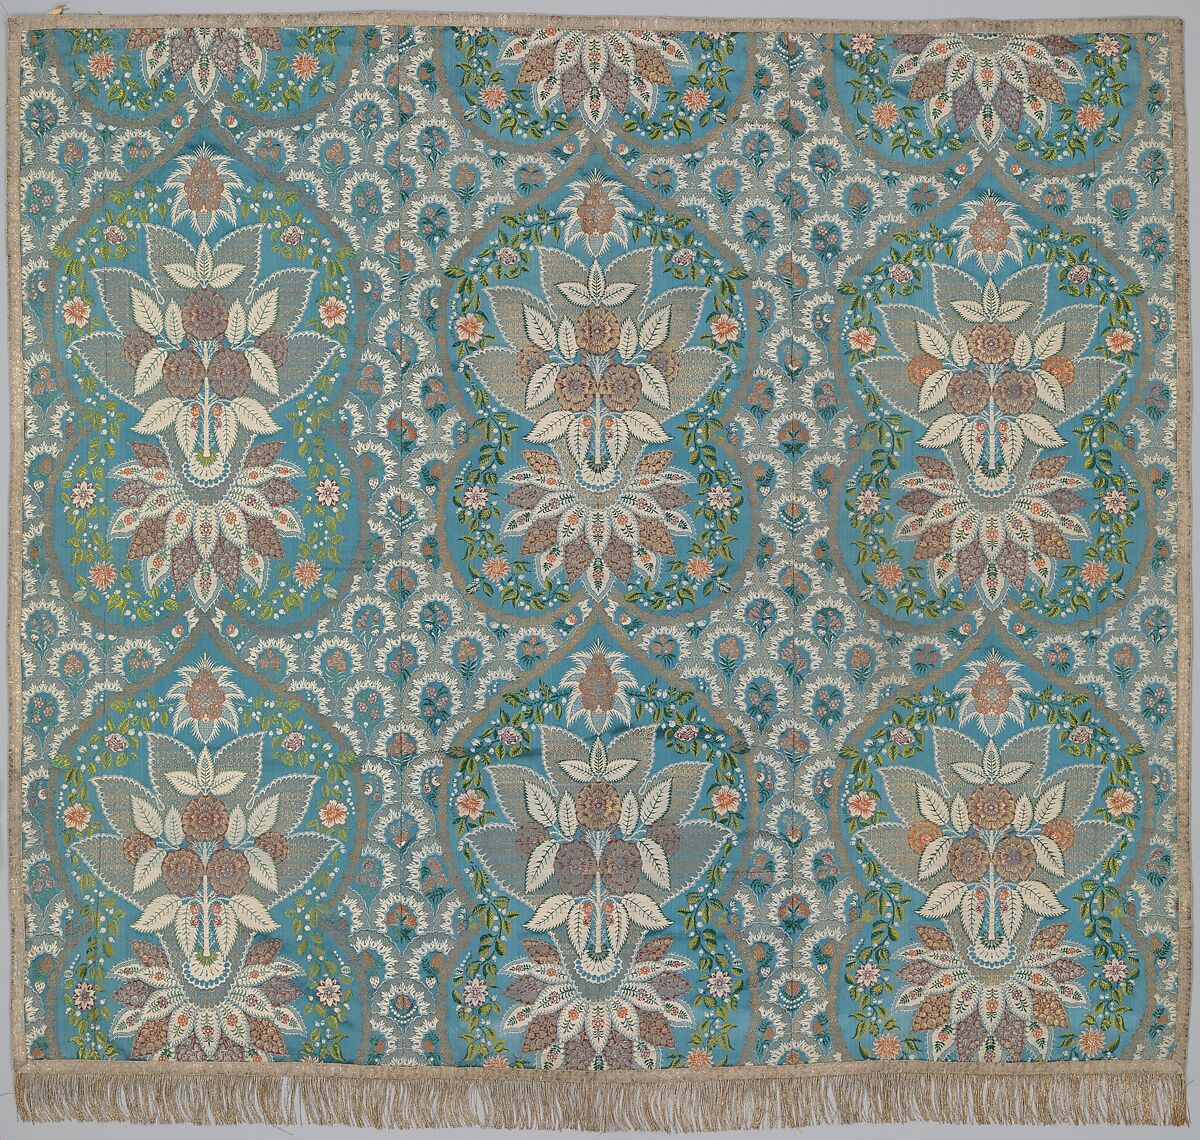 Panel of lace-patterned silk, Lampas, silk and metal thread, French 